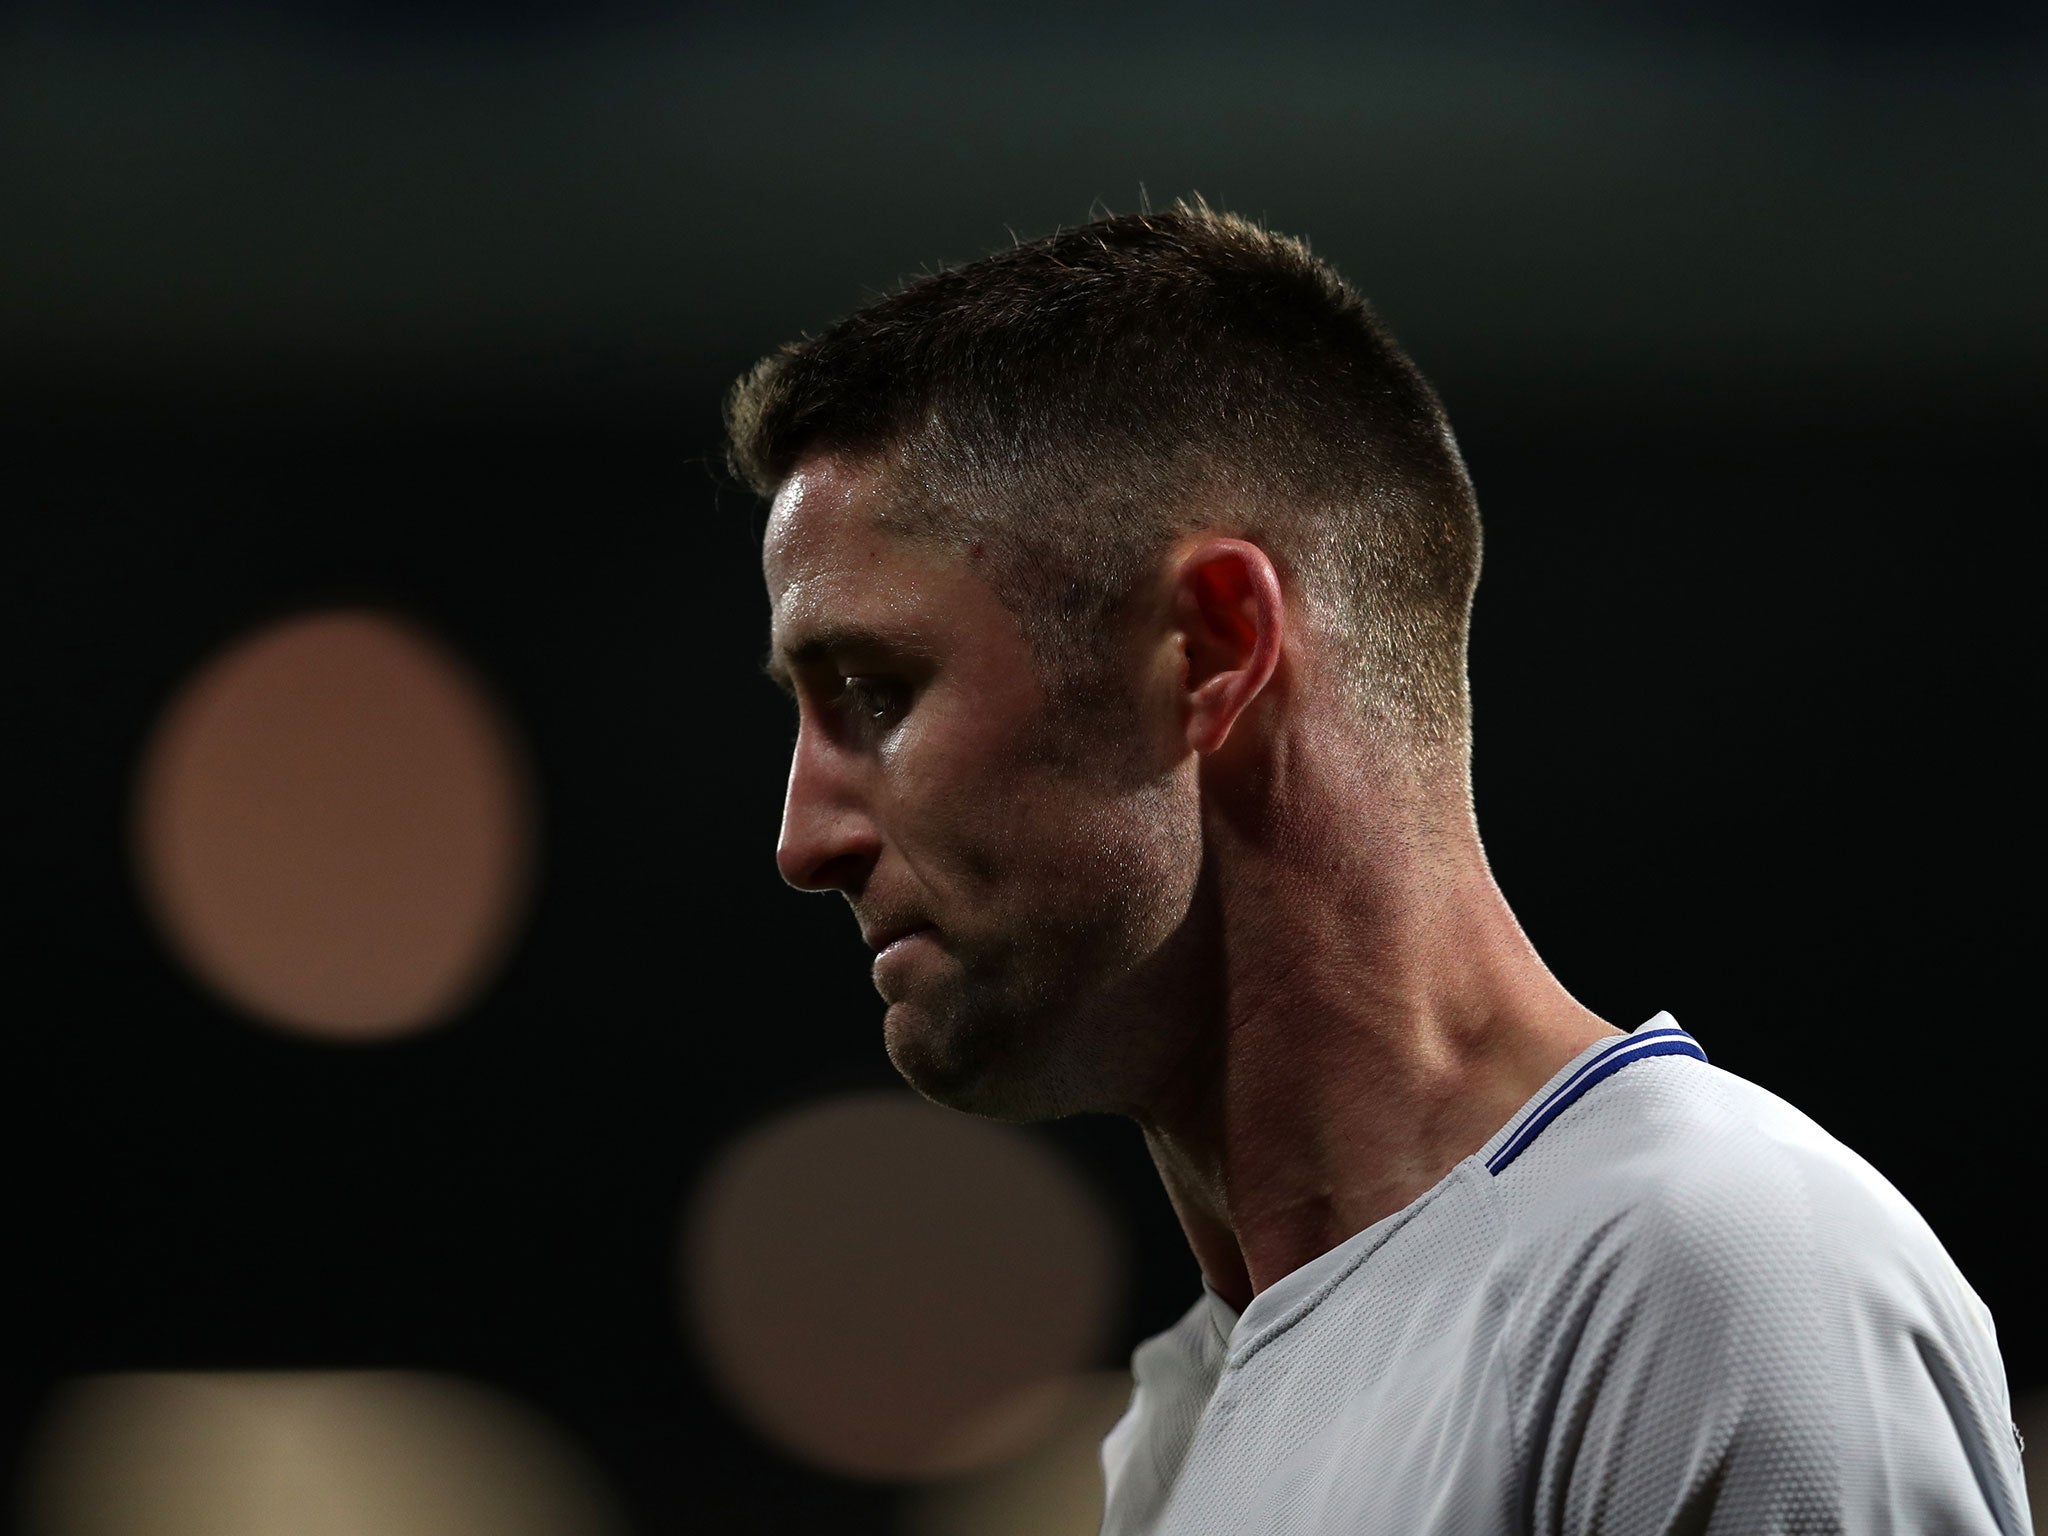 Gary Cahill was speaking after Saturday's 4-0 over West Brom